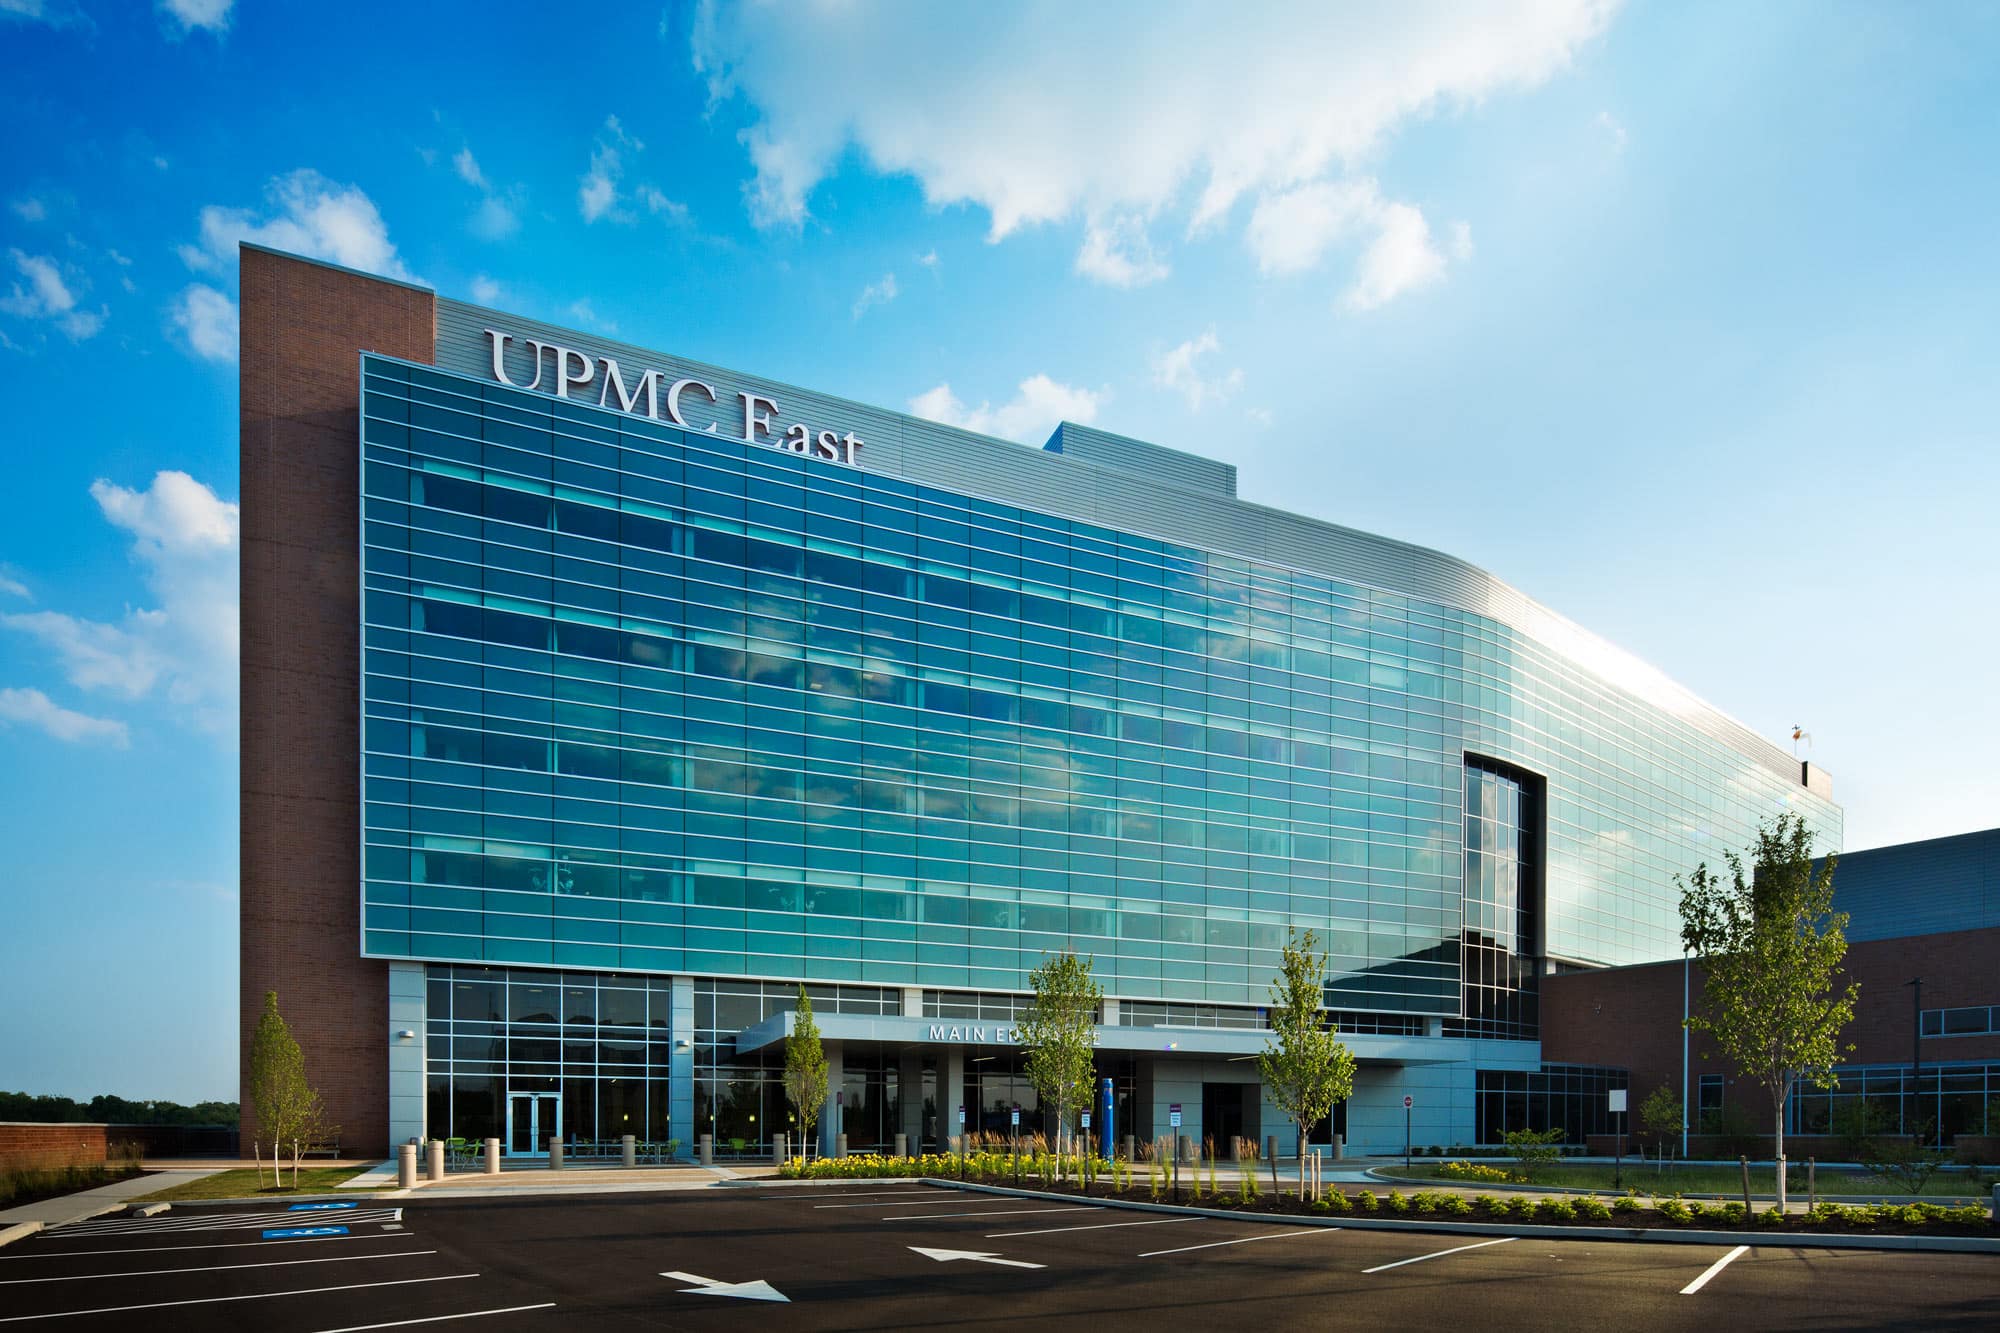 UPMC East Exterior Image Featuring Entryway and Wall of Windows